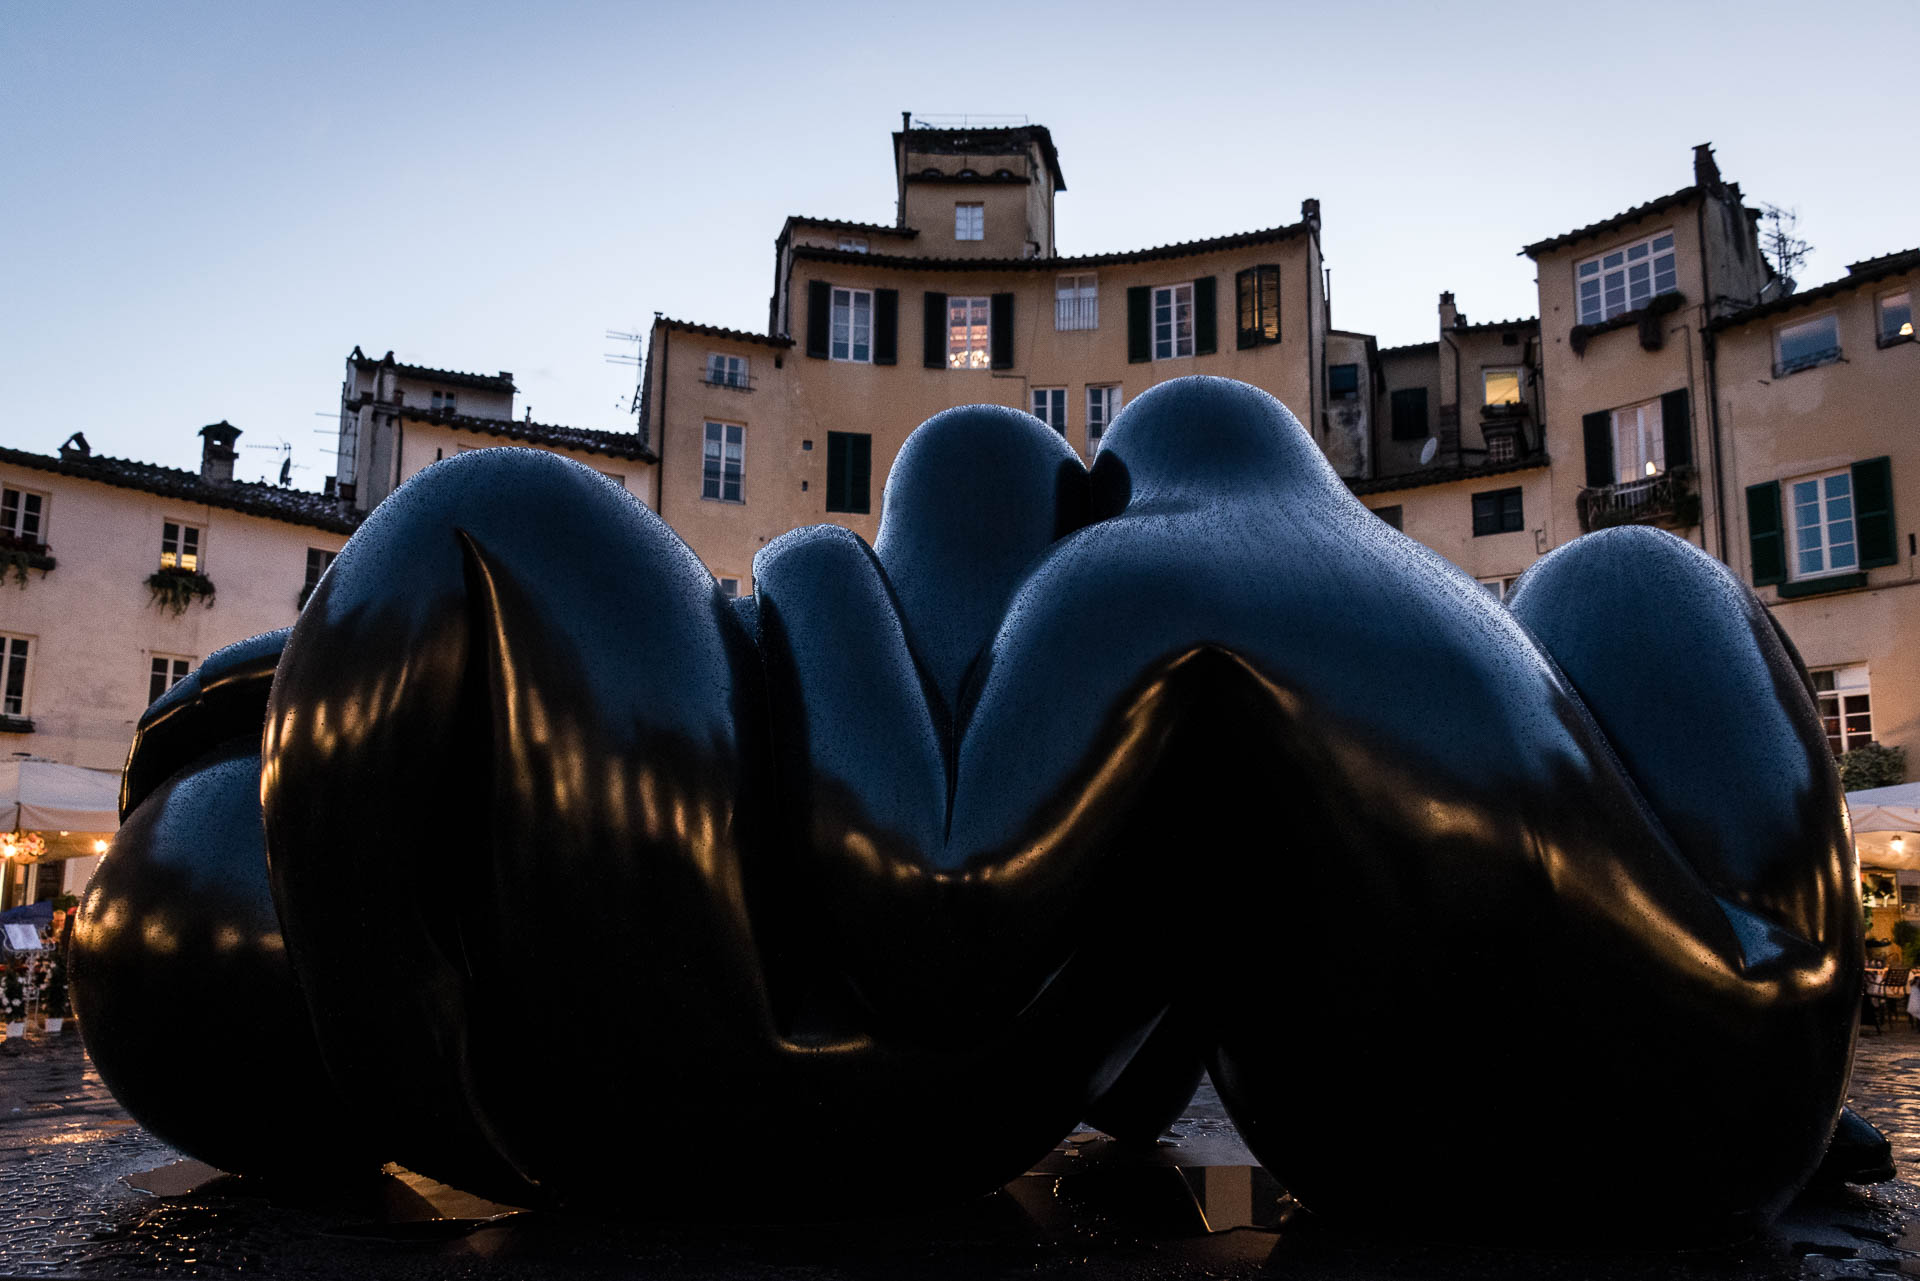 An art work in the middle of the Piazza dell'Anfiteatro square in Lucca